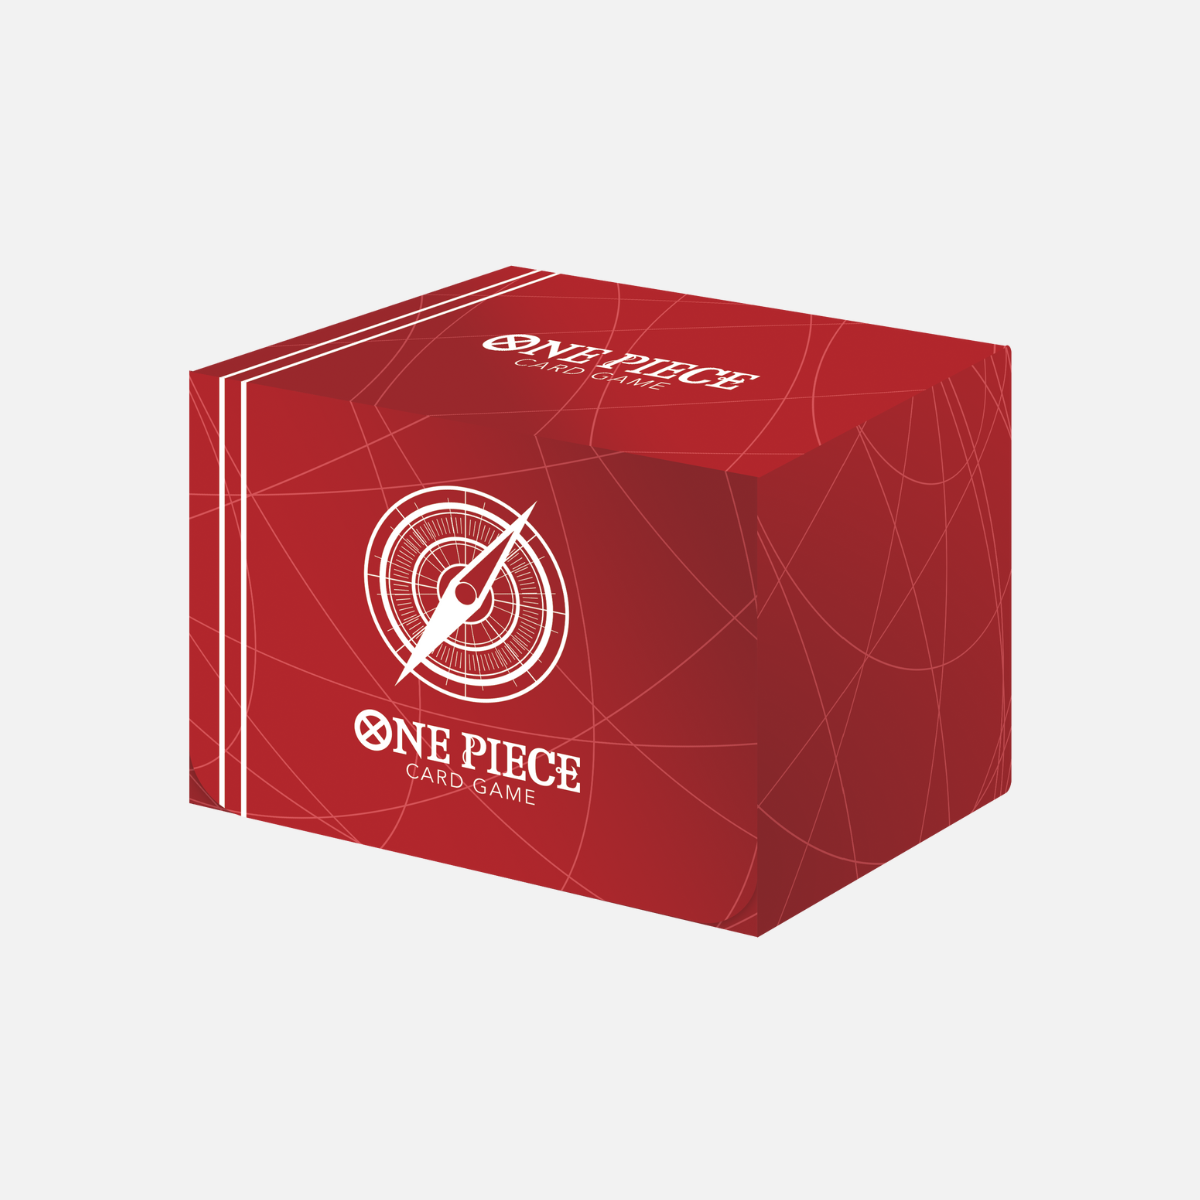 One Piece card game Red Deck box